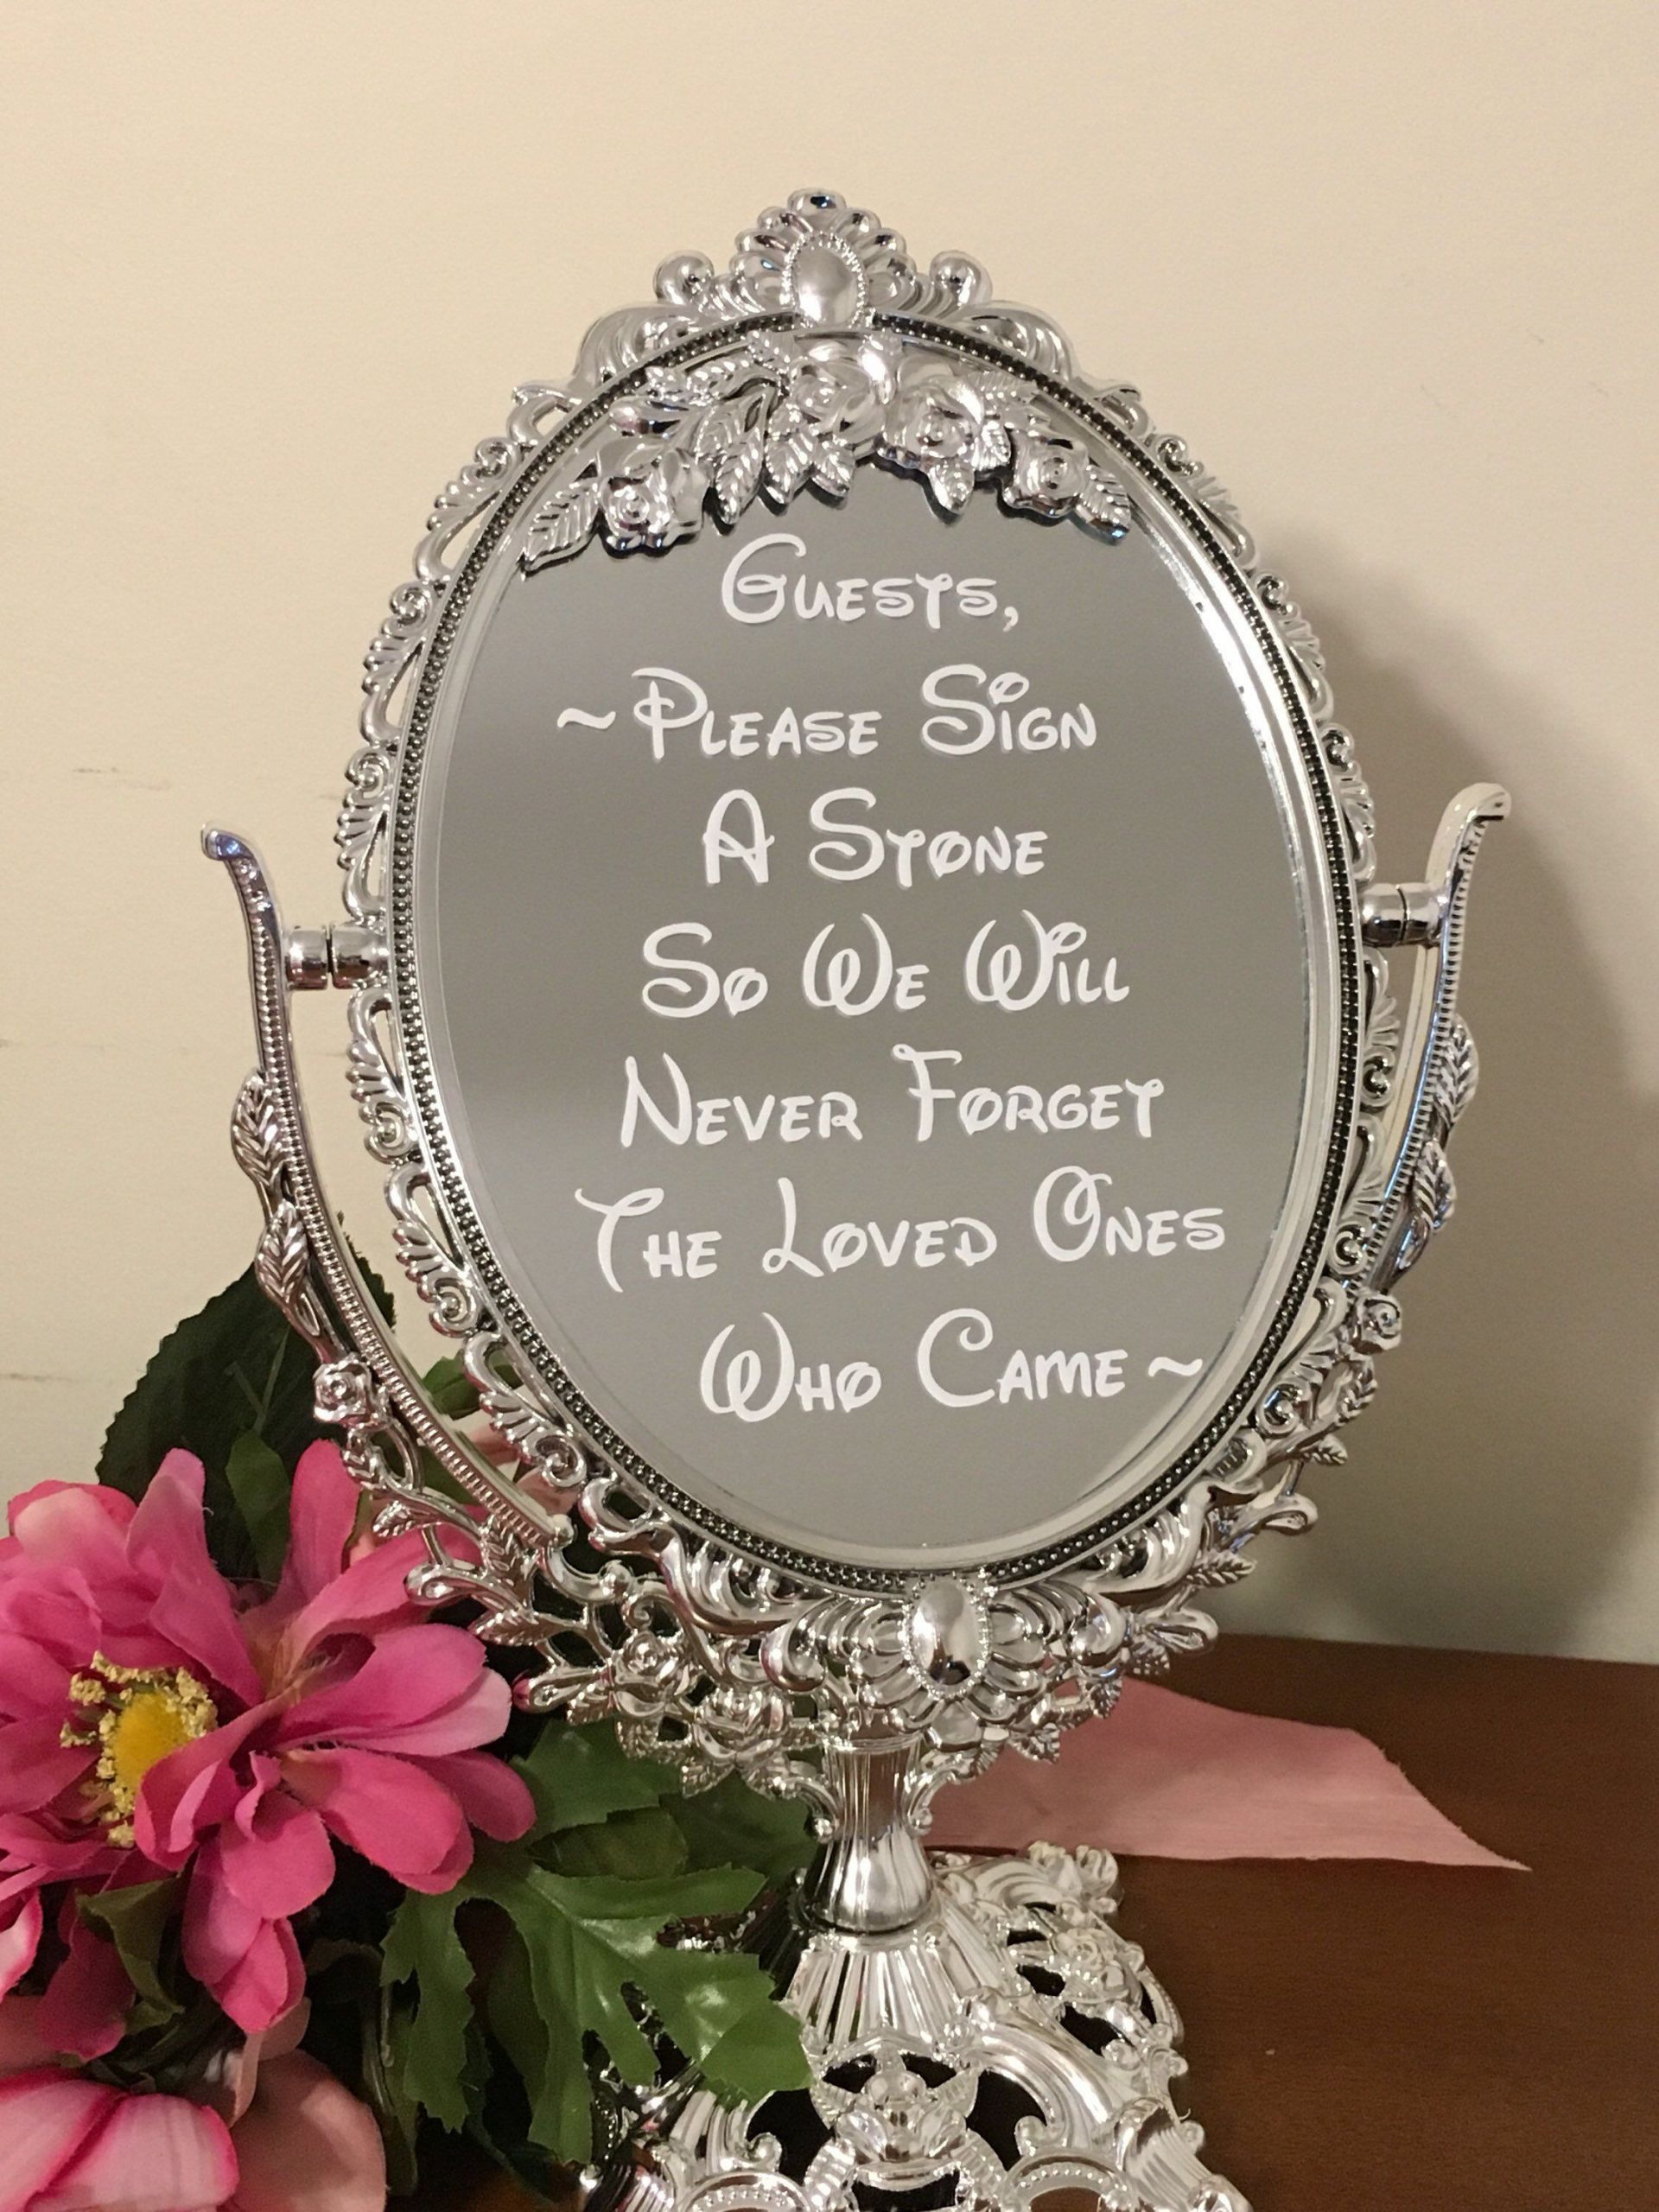 Stone Wedding Guest Book
 Please sign a stone wedding guestbook mirror sign